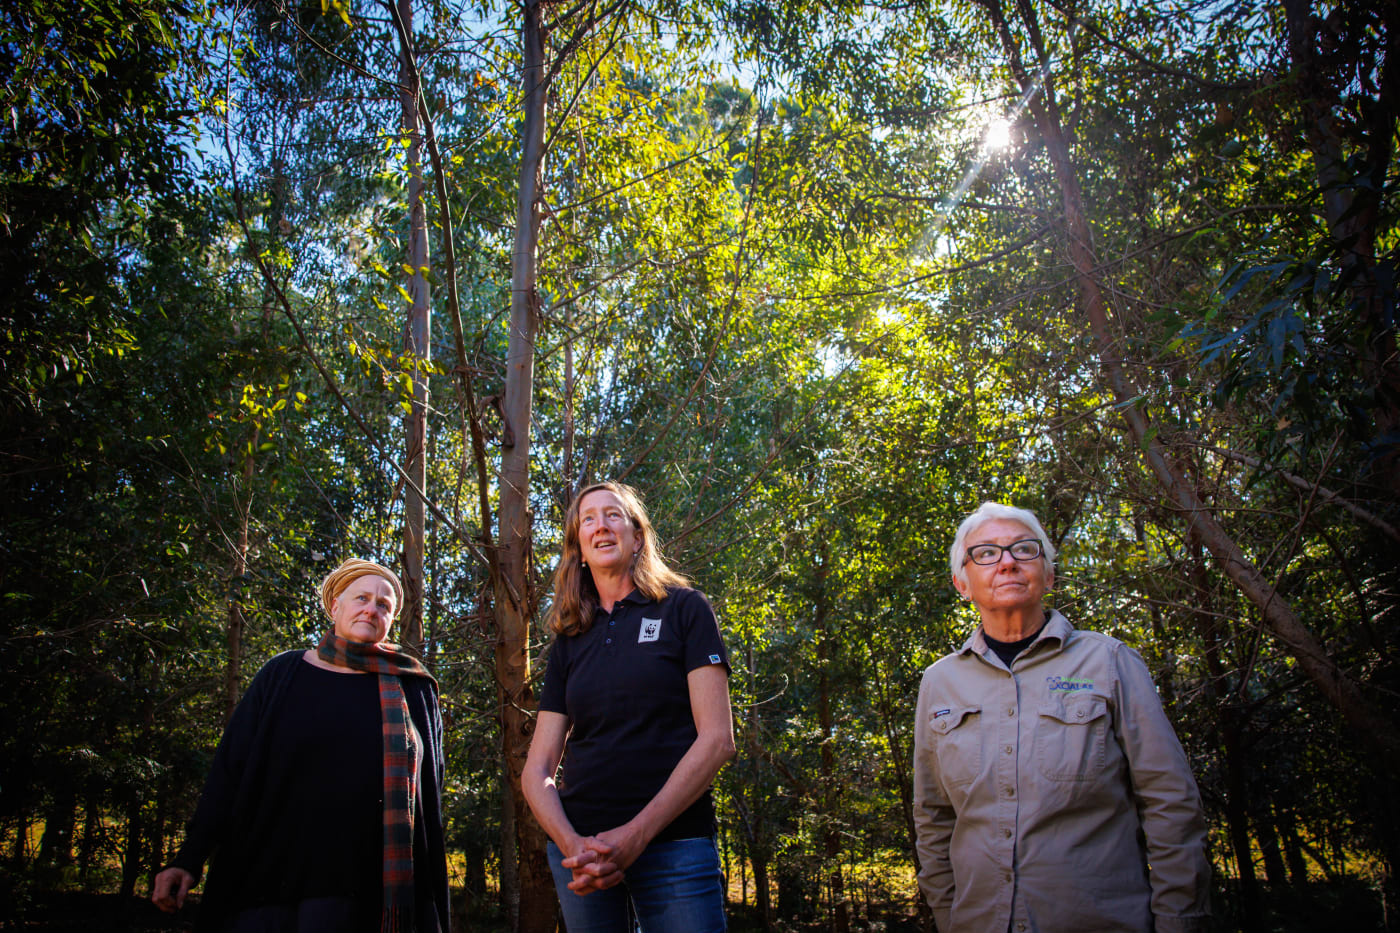 Hilary Herrmann, Tanya Pritchard and Linda Sparrow in the native forest Hilary planted on her property